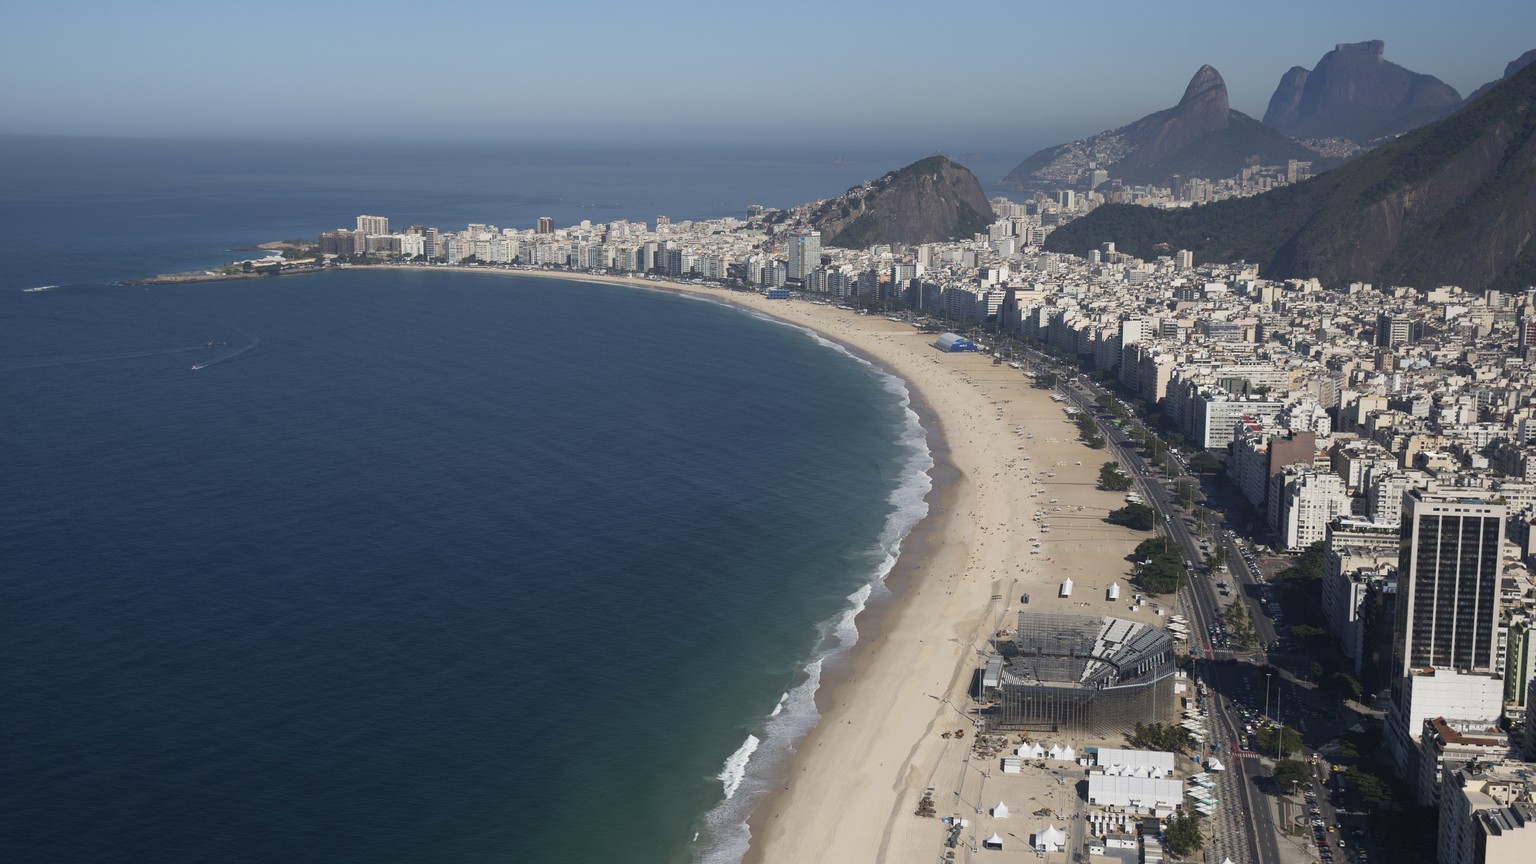 The Olympic beach volleyball venue continues under construction on Copacabana beach in Rio de Janeiro, Brazil, Tuesday, July 5, 2016. With the Olympics set to start on Aug. 5, the games and the city h ...